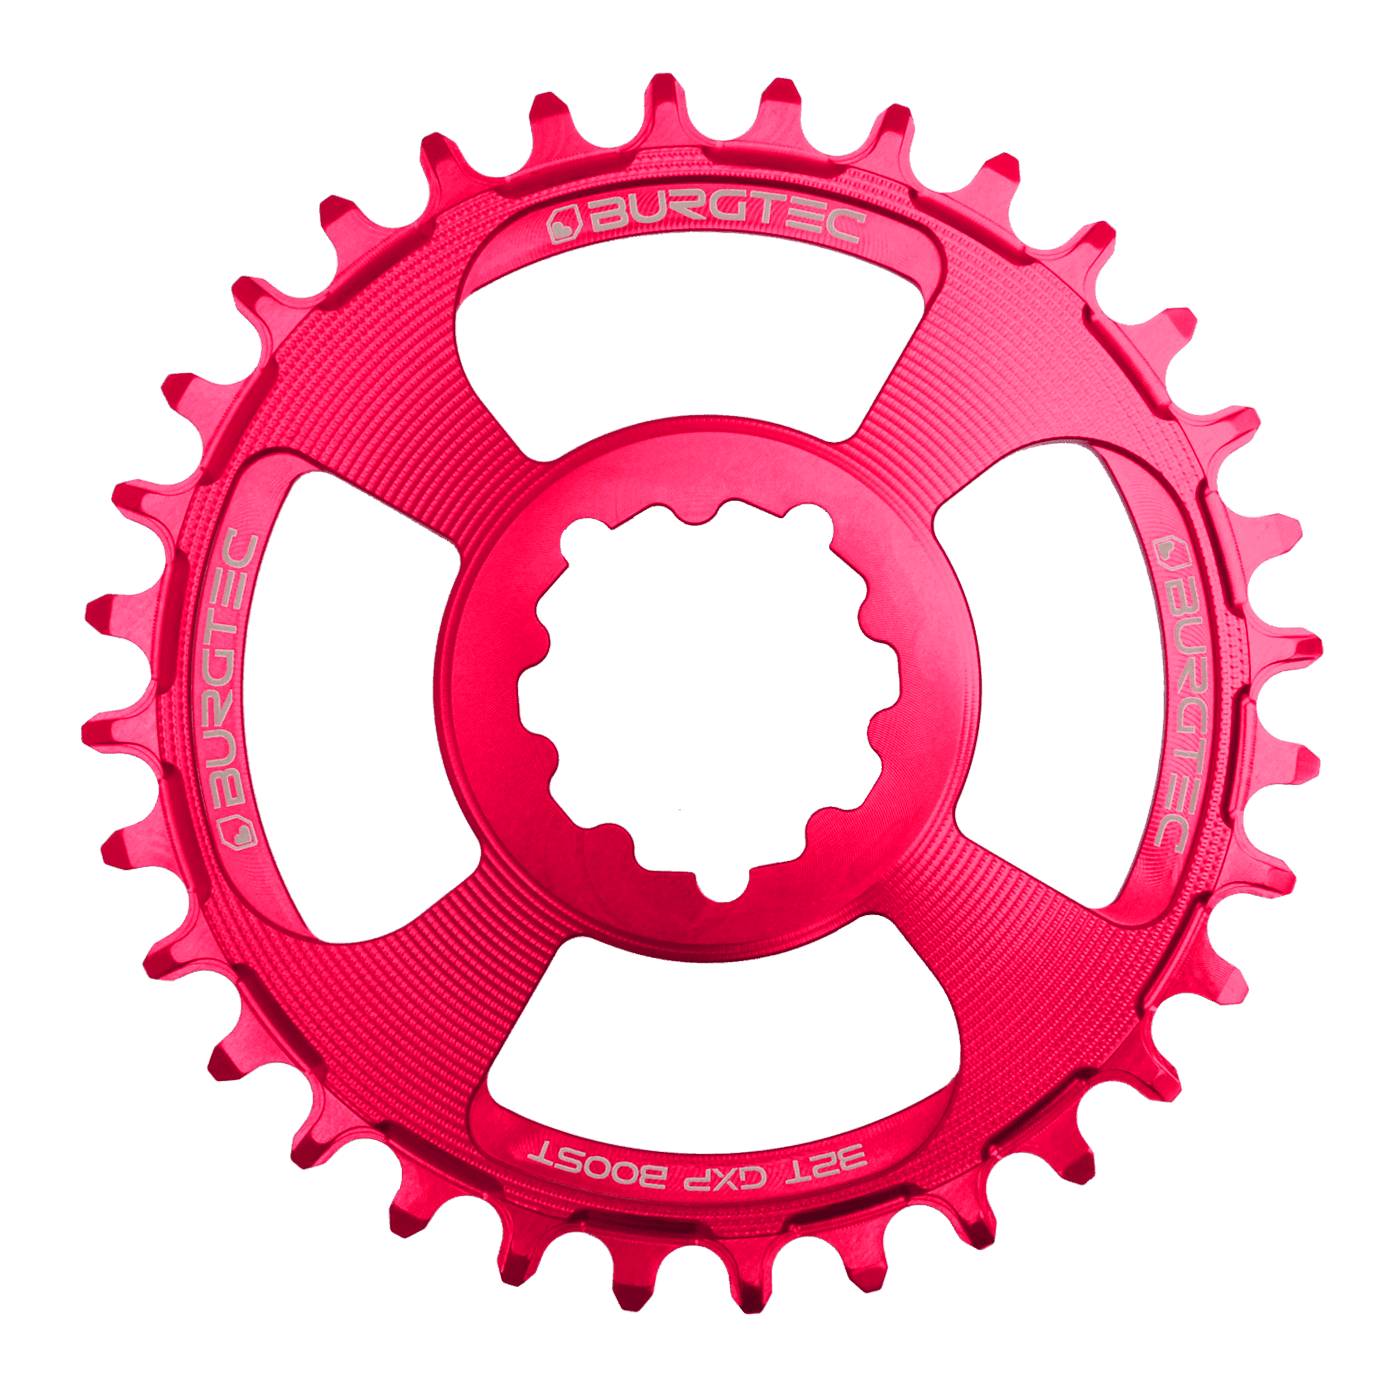 Burgtec GXP Boost 3mm Offset Thick Thin Chainring toxic barbie pink